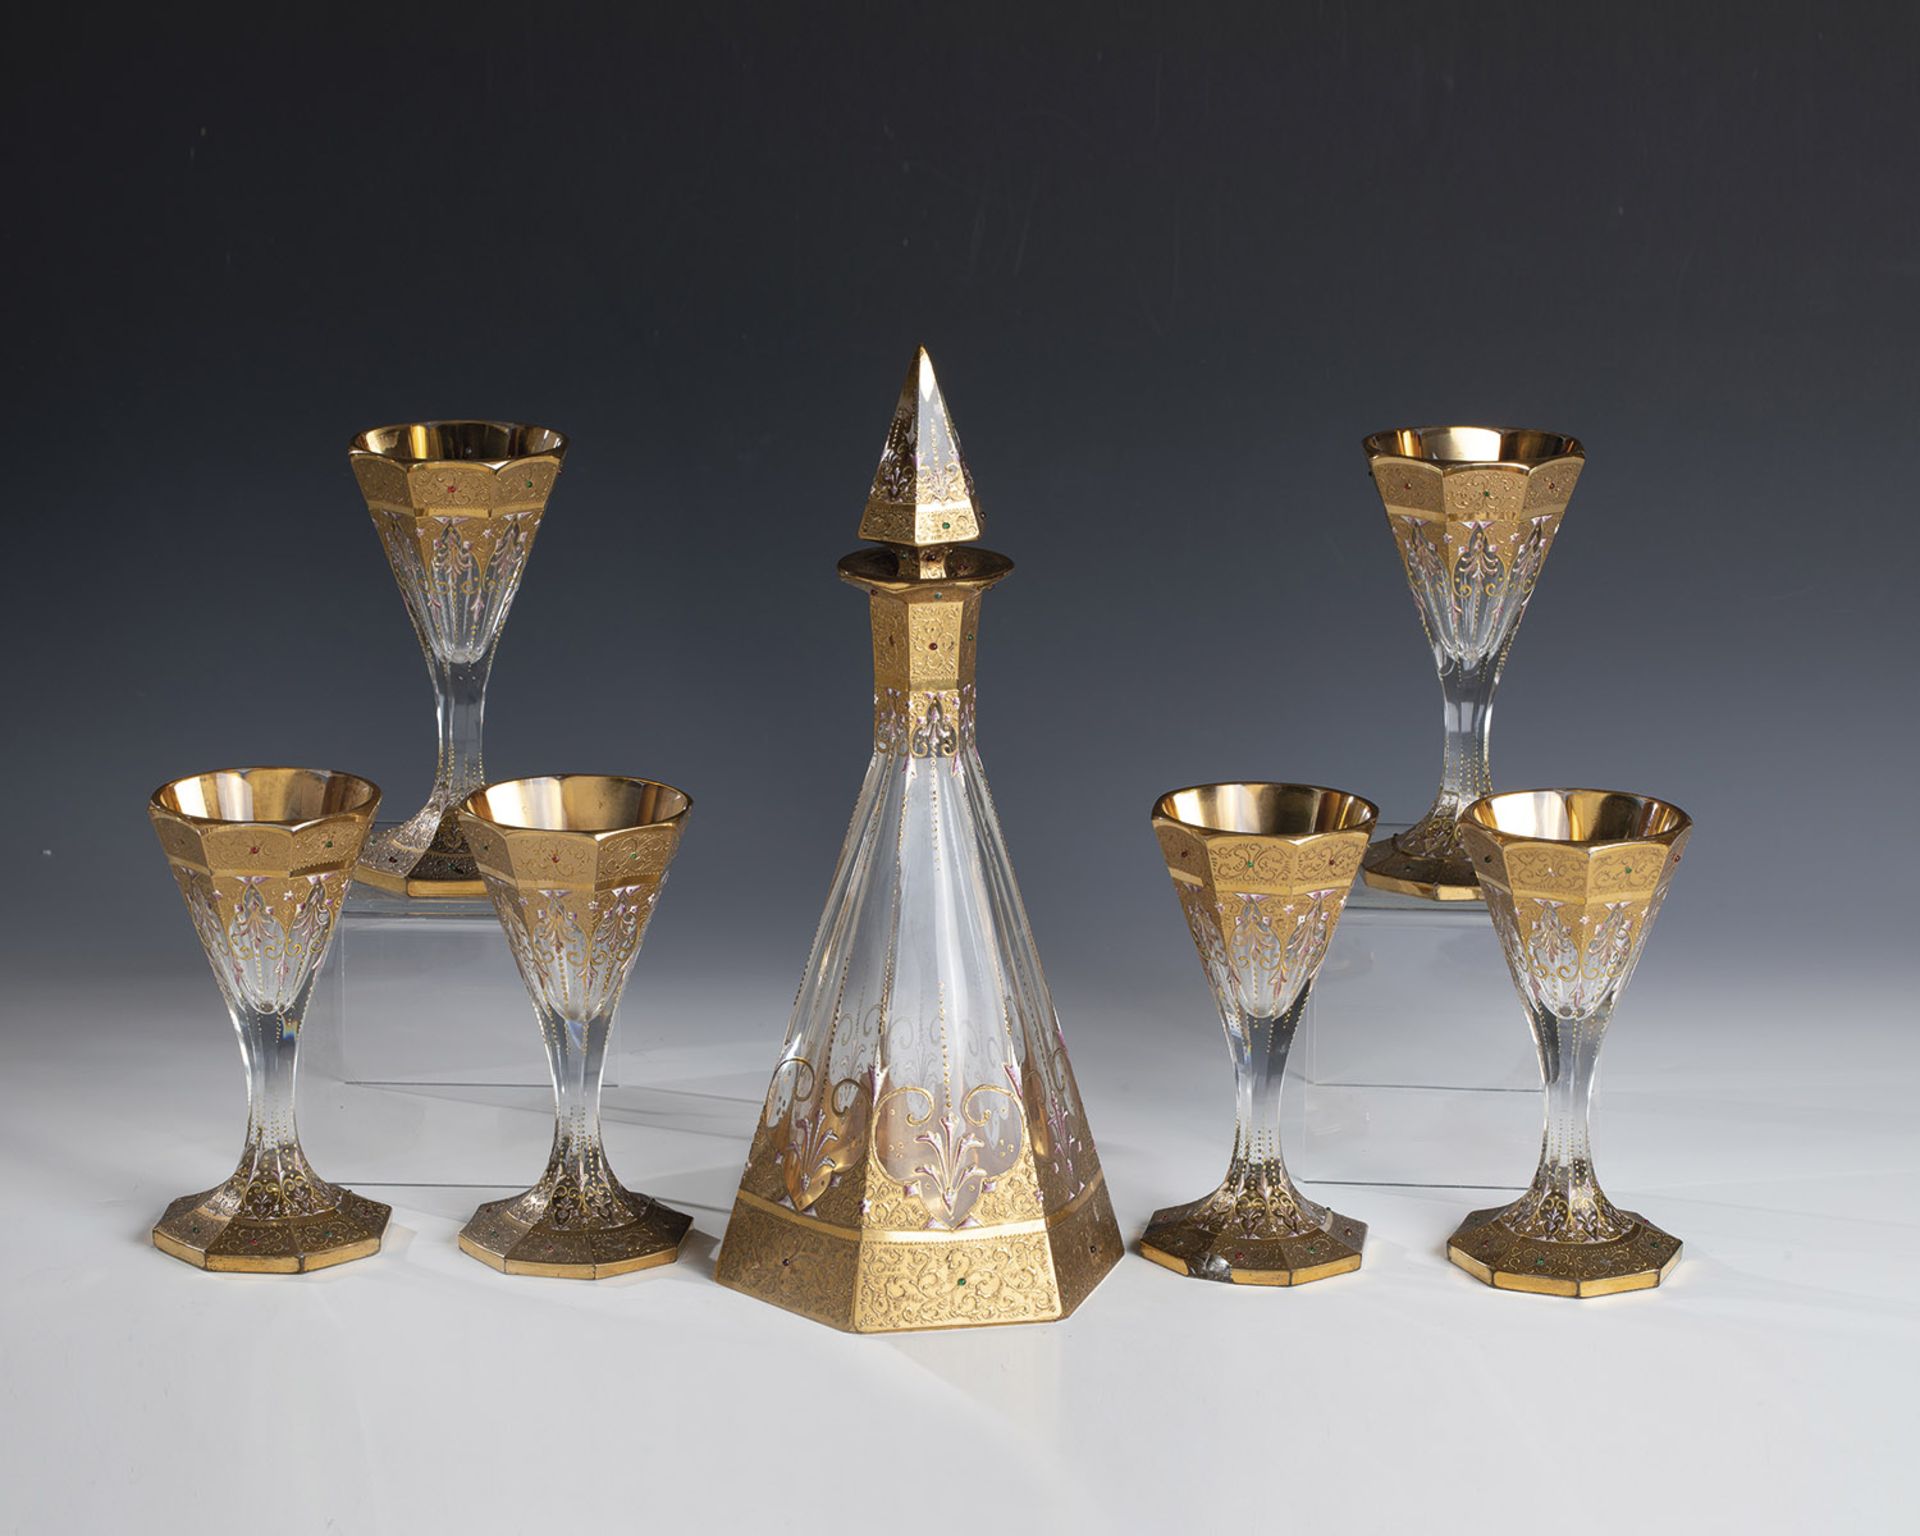 Drinking set: carafe and six glasses of Bohemia, ca. 1900 A carafe with stopper and six drinking